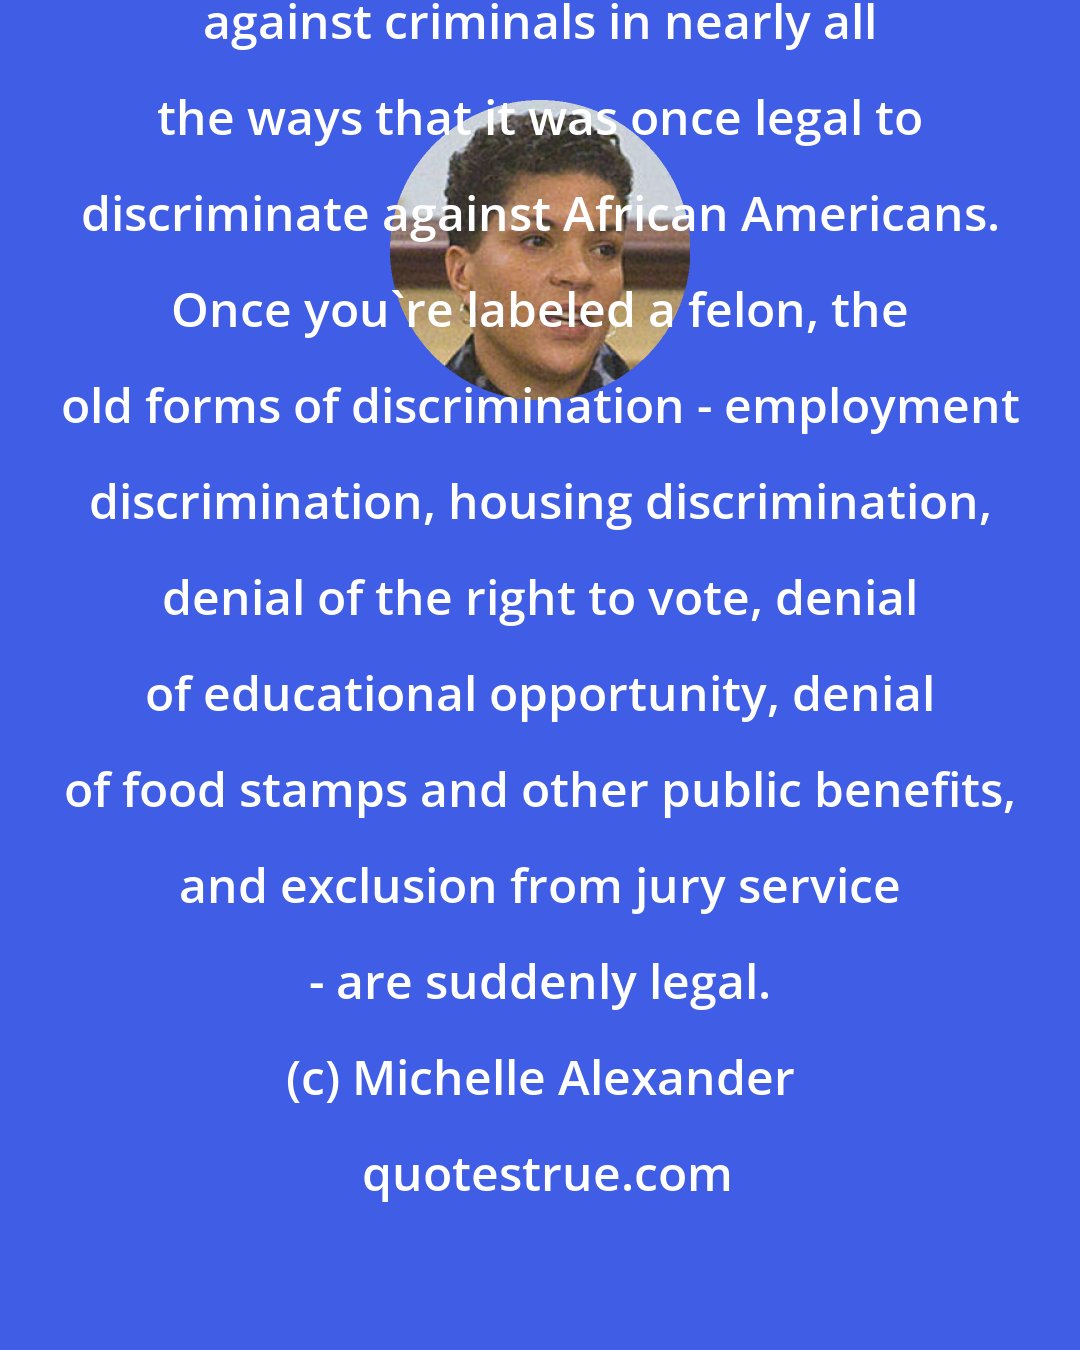 Michelle Alexander: Today it is perfectly legal to discriminate against criminals in nearly all the ways that it was once legal to discriminate against African Americans. Once you're labeled a felon, the old forms of discrimination - employment discrimination, housing discrimination, denial of the right to vote, denial of educational opportunity, denial of food stamps and other public benefits, and exclusion from jury service - are suddenly legal.